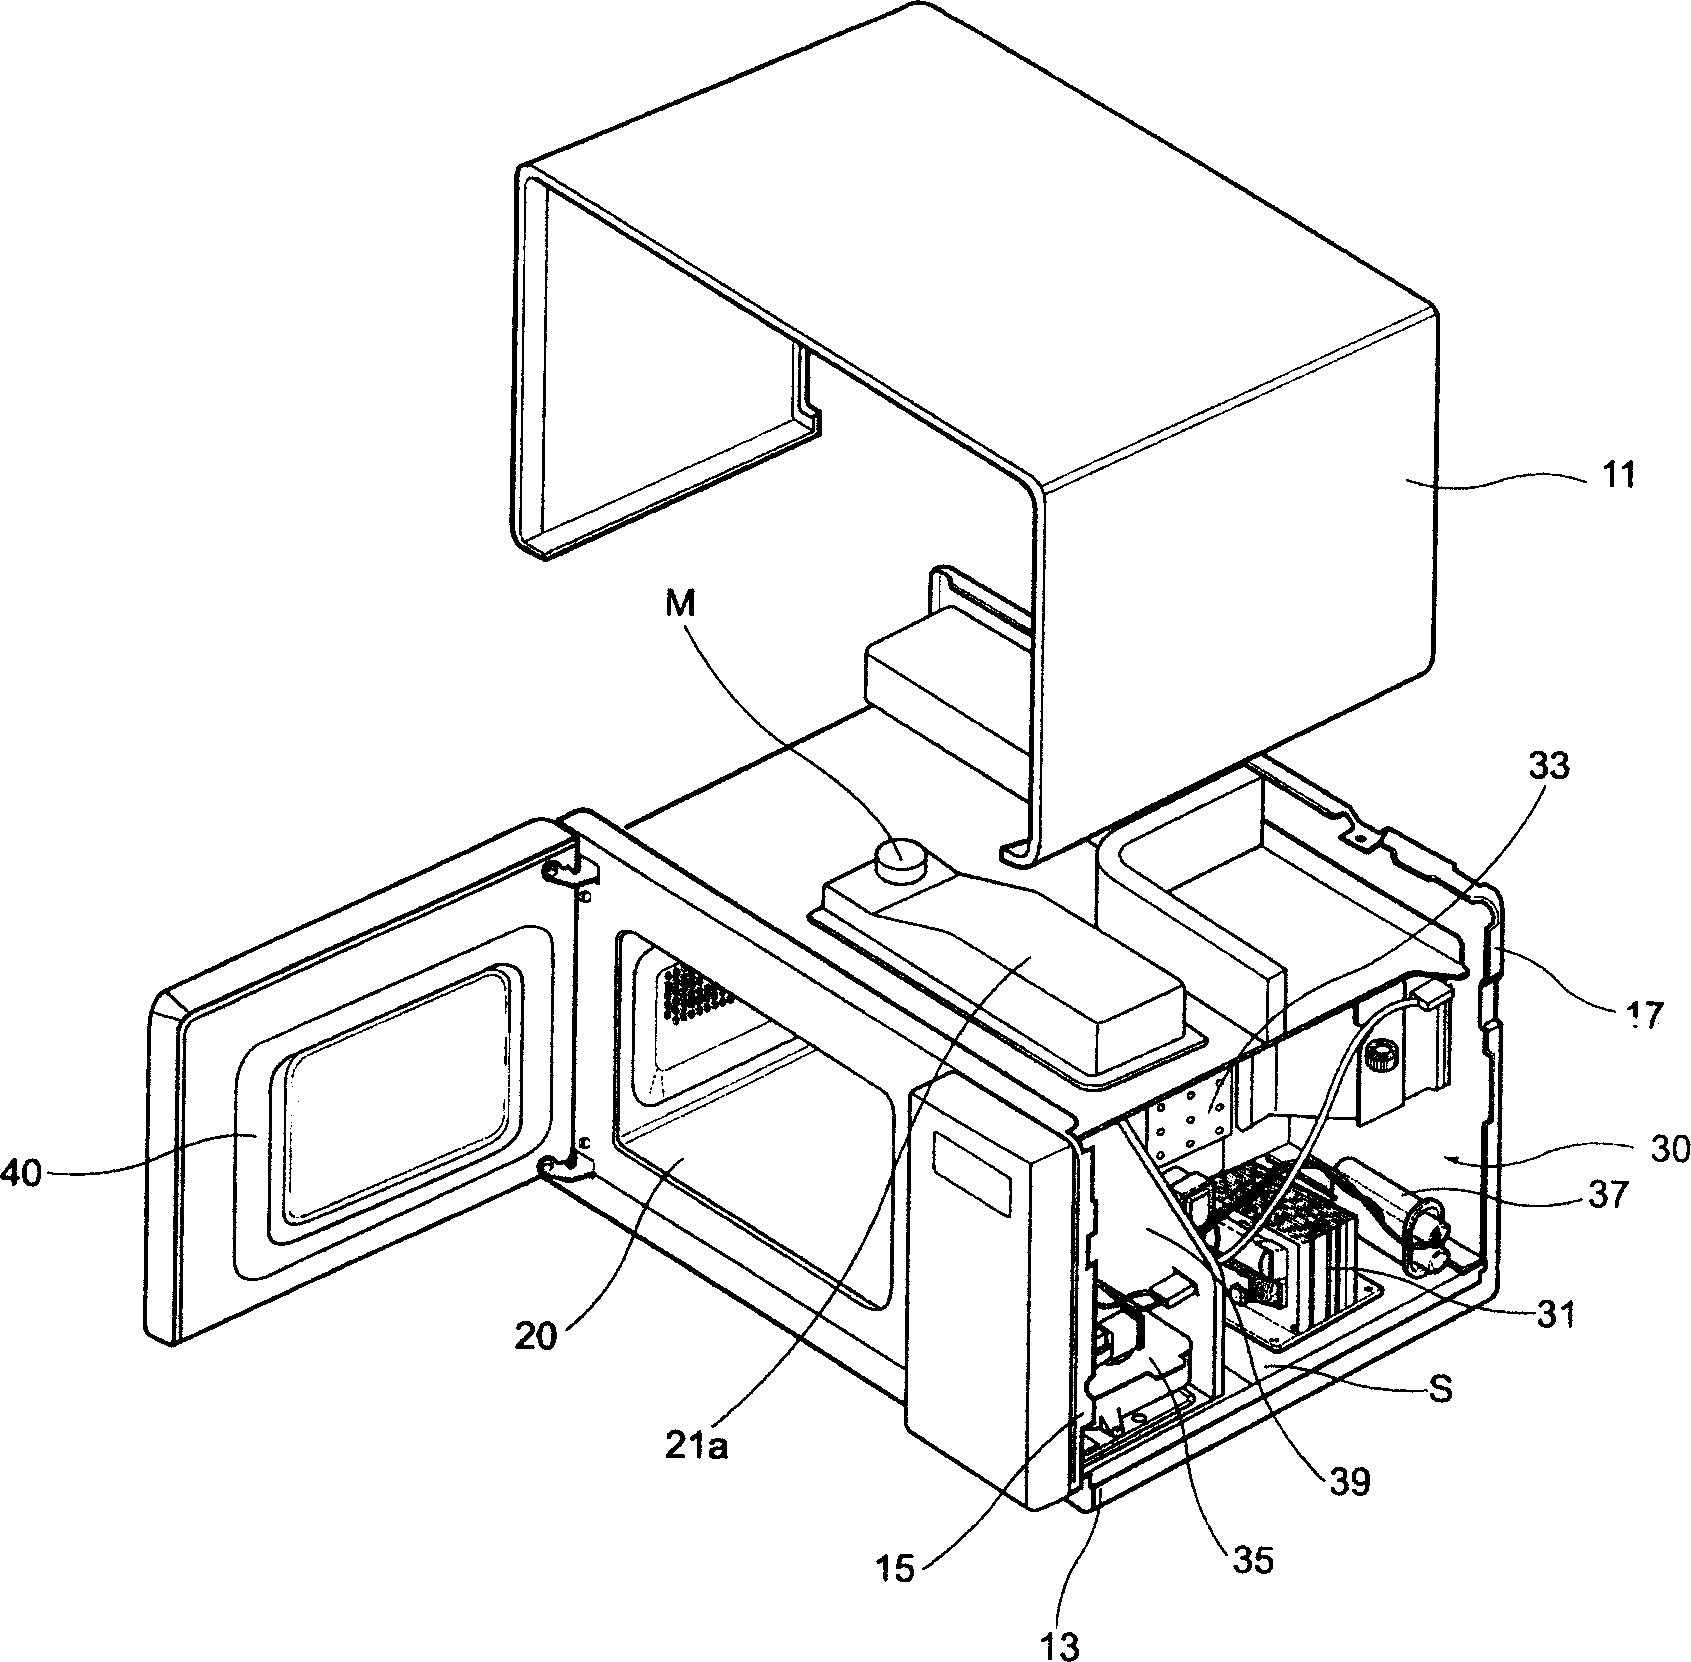 Surface plate structure for bottom of microwave oven chamber